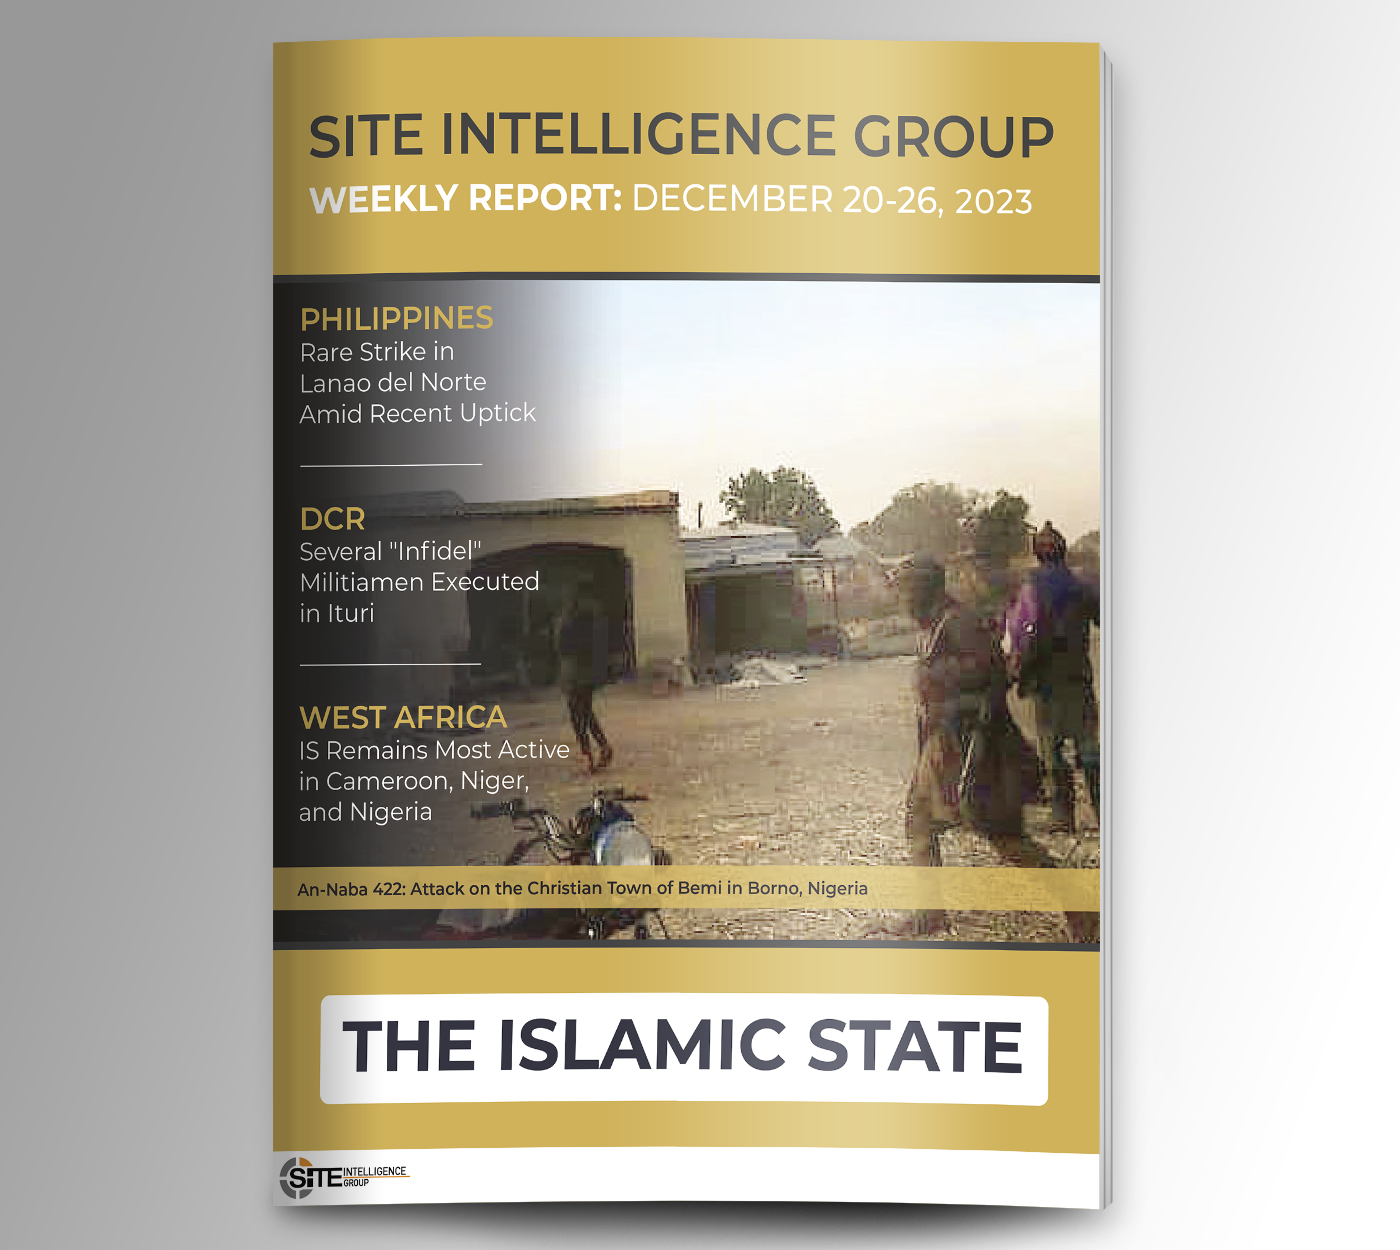 Weekly inSITE on the Islamic State for December 20-26, 2023